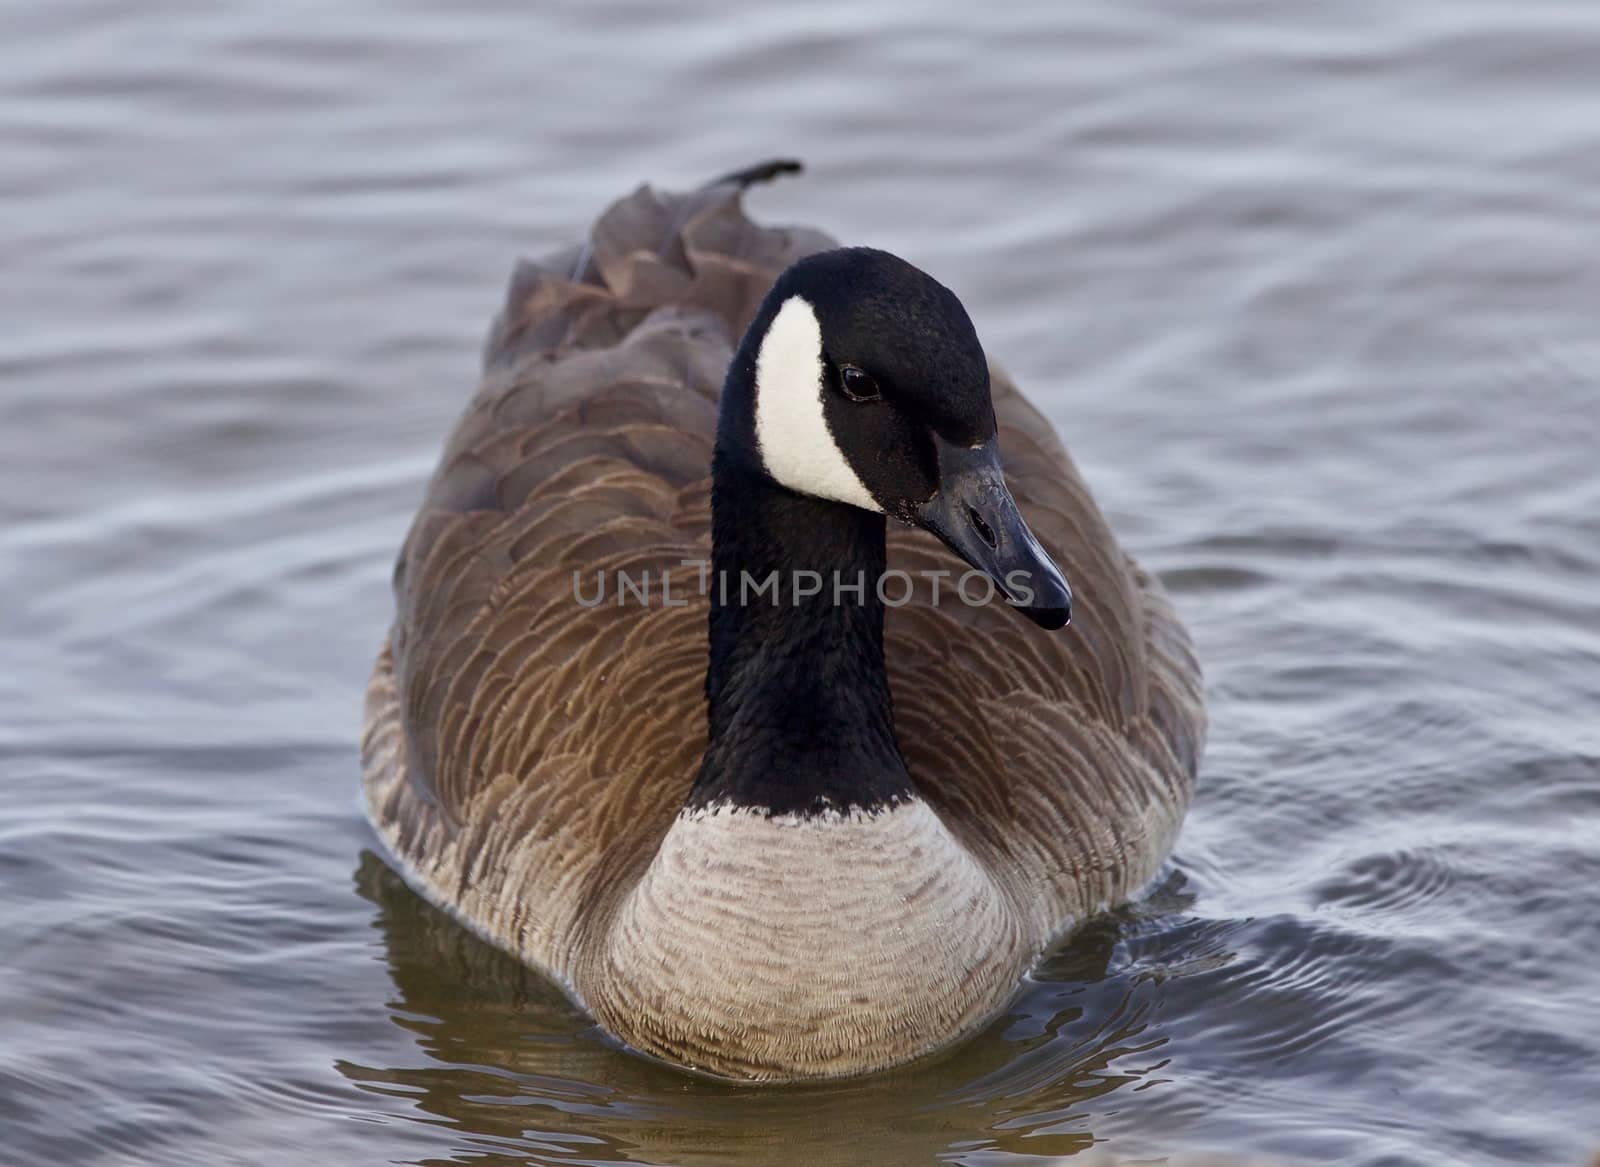 Beautiful image with a cute Canada goose in the lake by teo